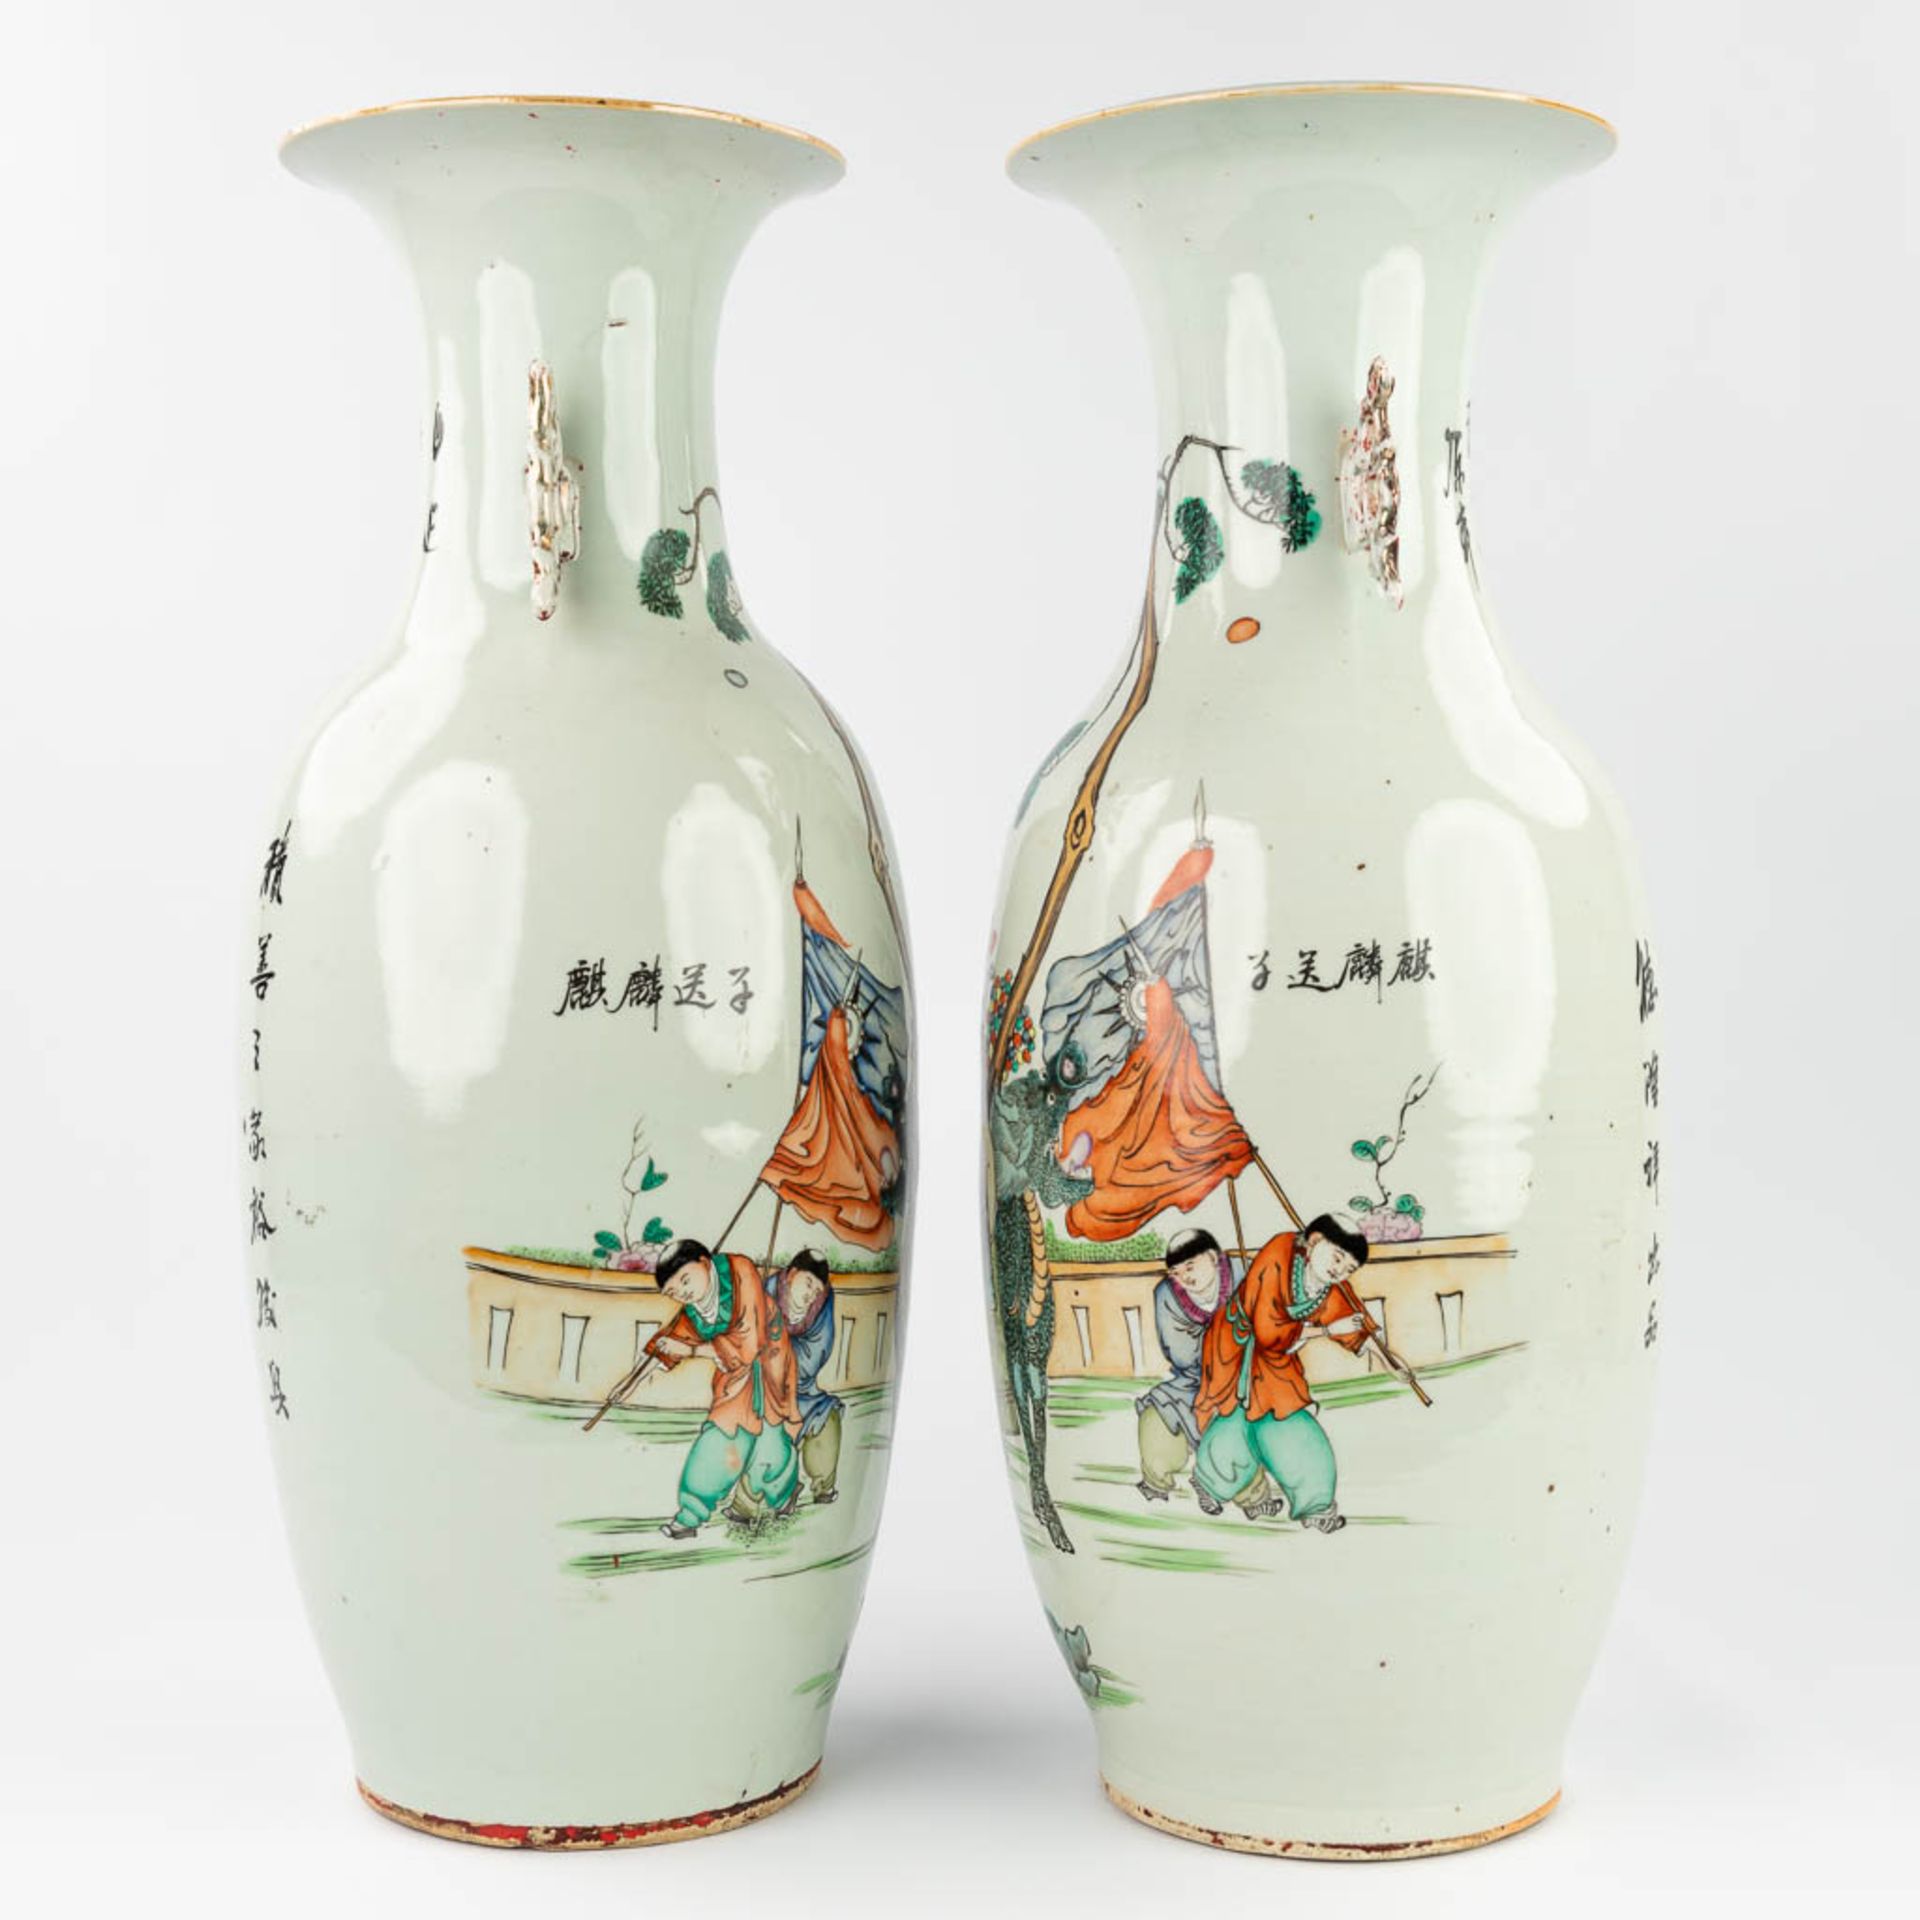 A pair of Chinese vases made of porcelain and decorated with mythological figurines. (58 x 22 cm) - Bild 10 aus 13